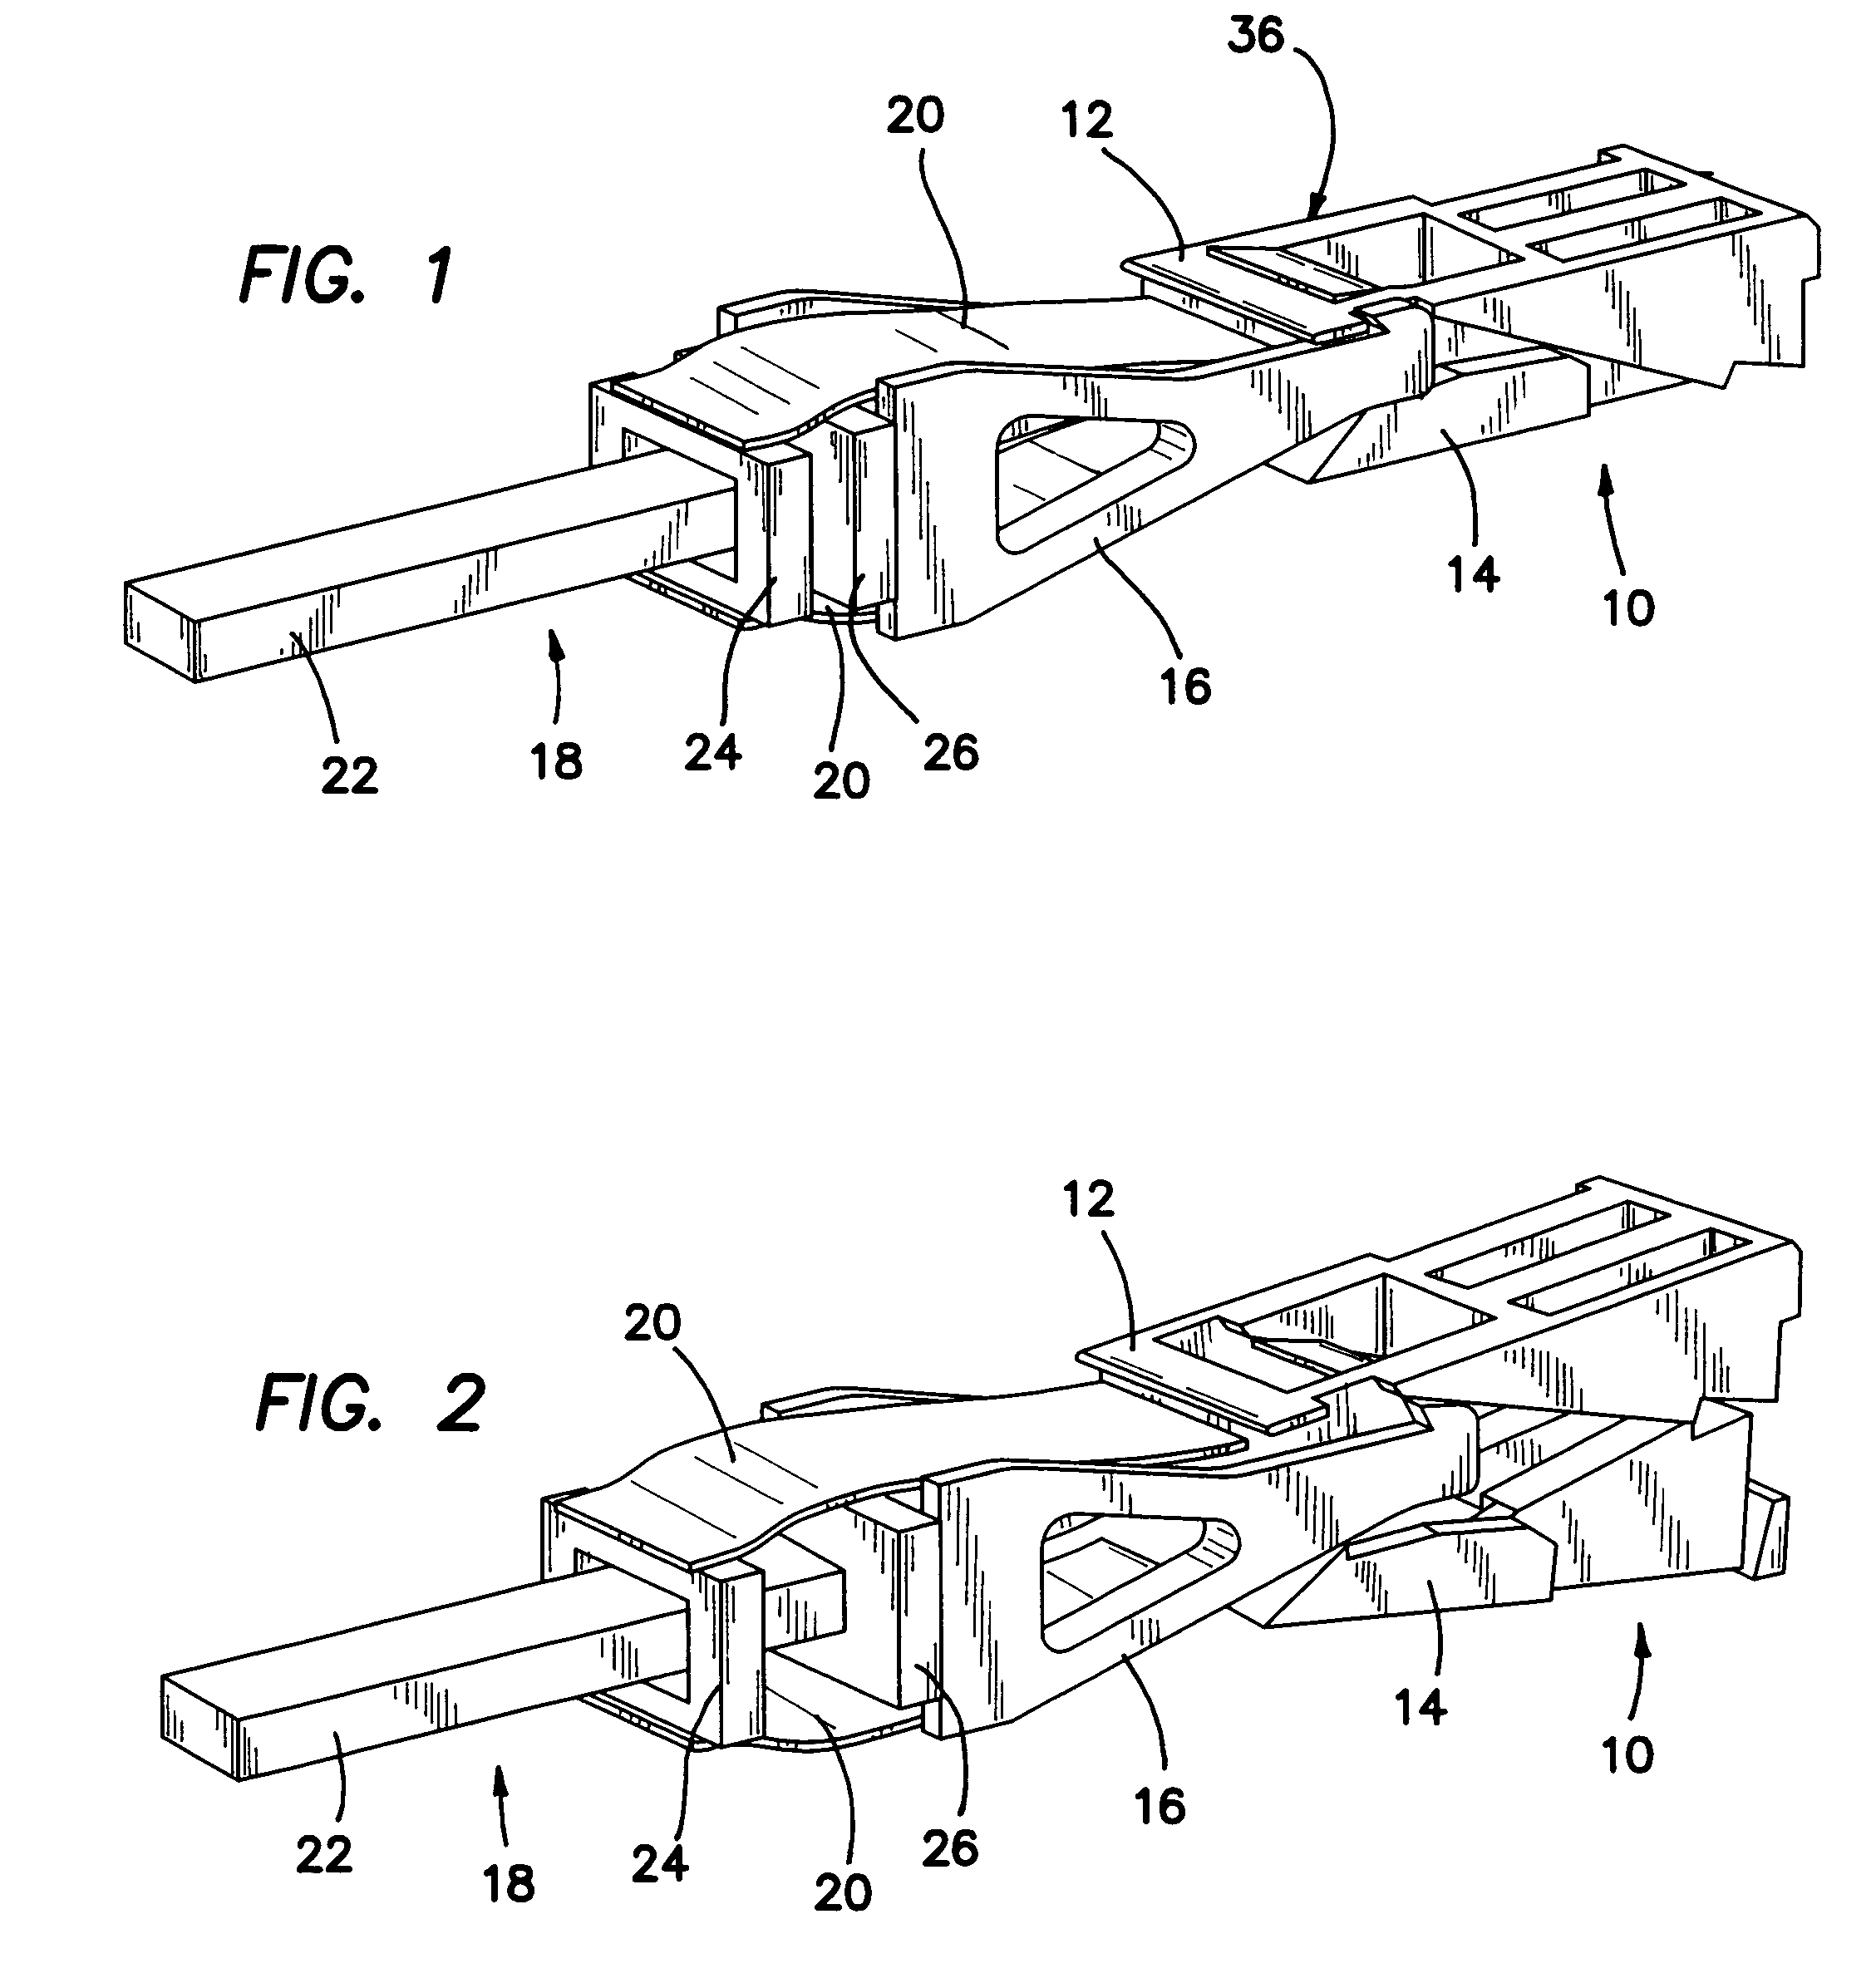 Posterior lumbar interbody fusion expandable cage with lordosis and method of deploying the same